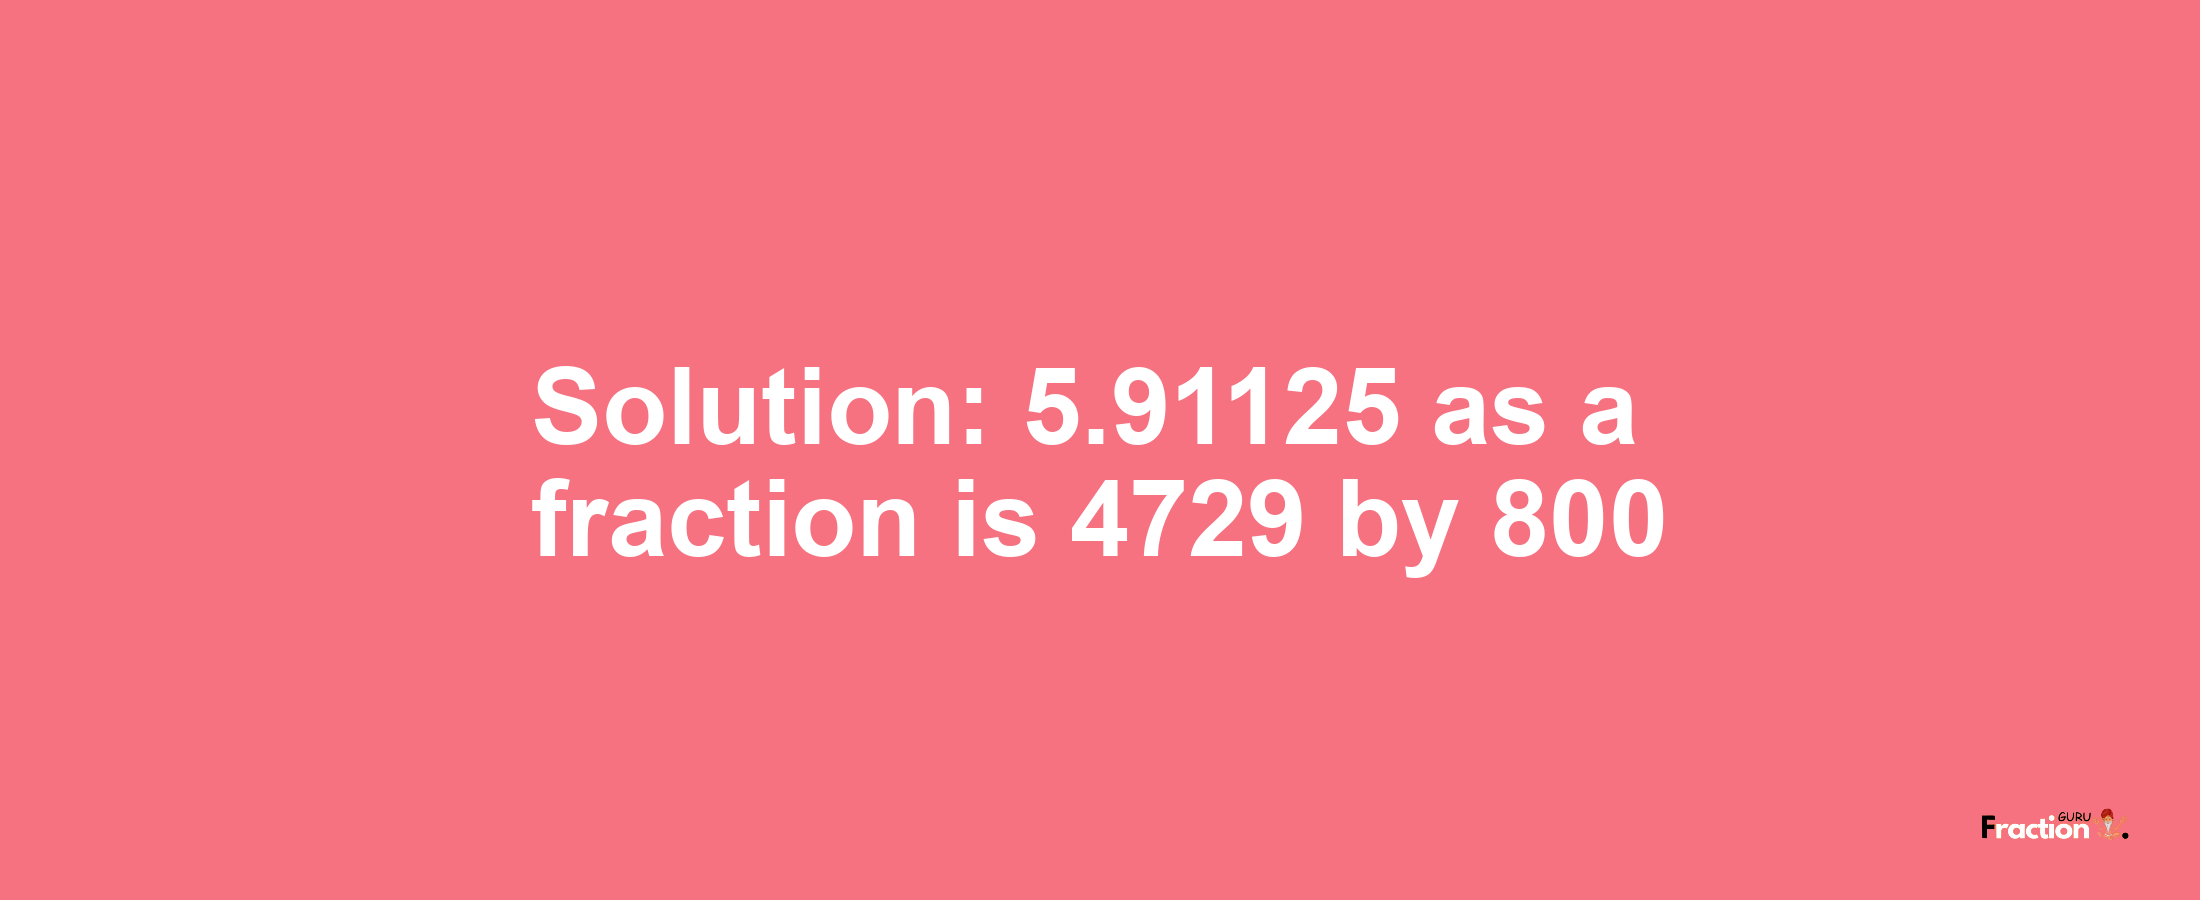 Solution:5.91125 as a fraction is 4729/800